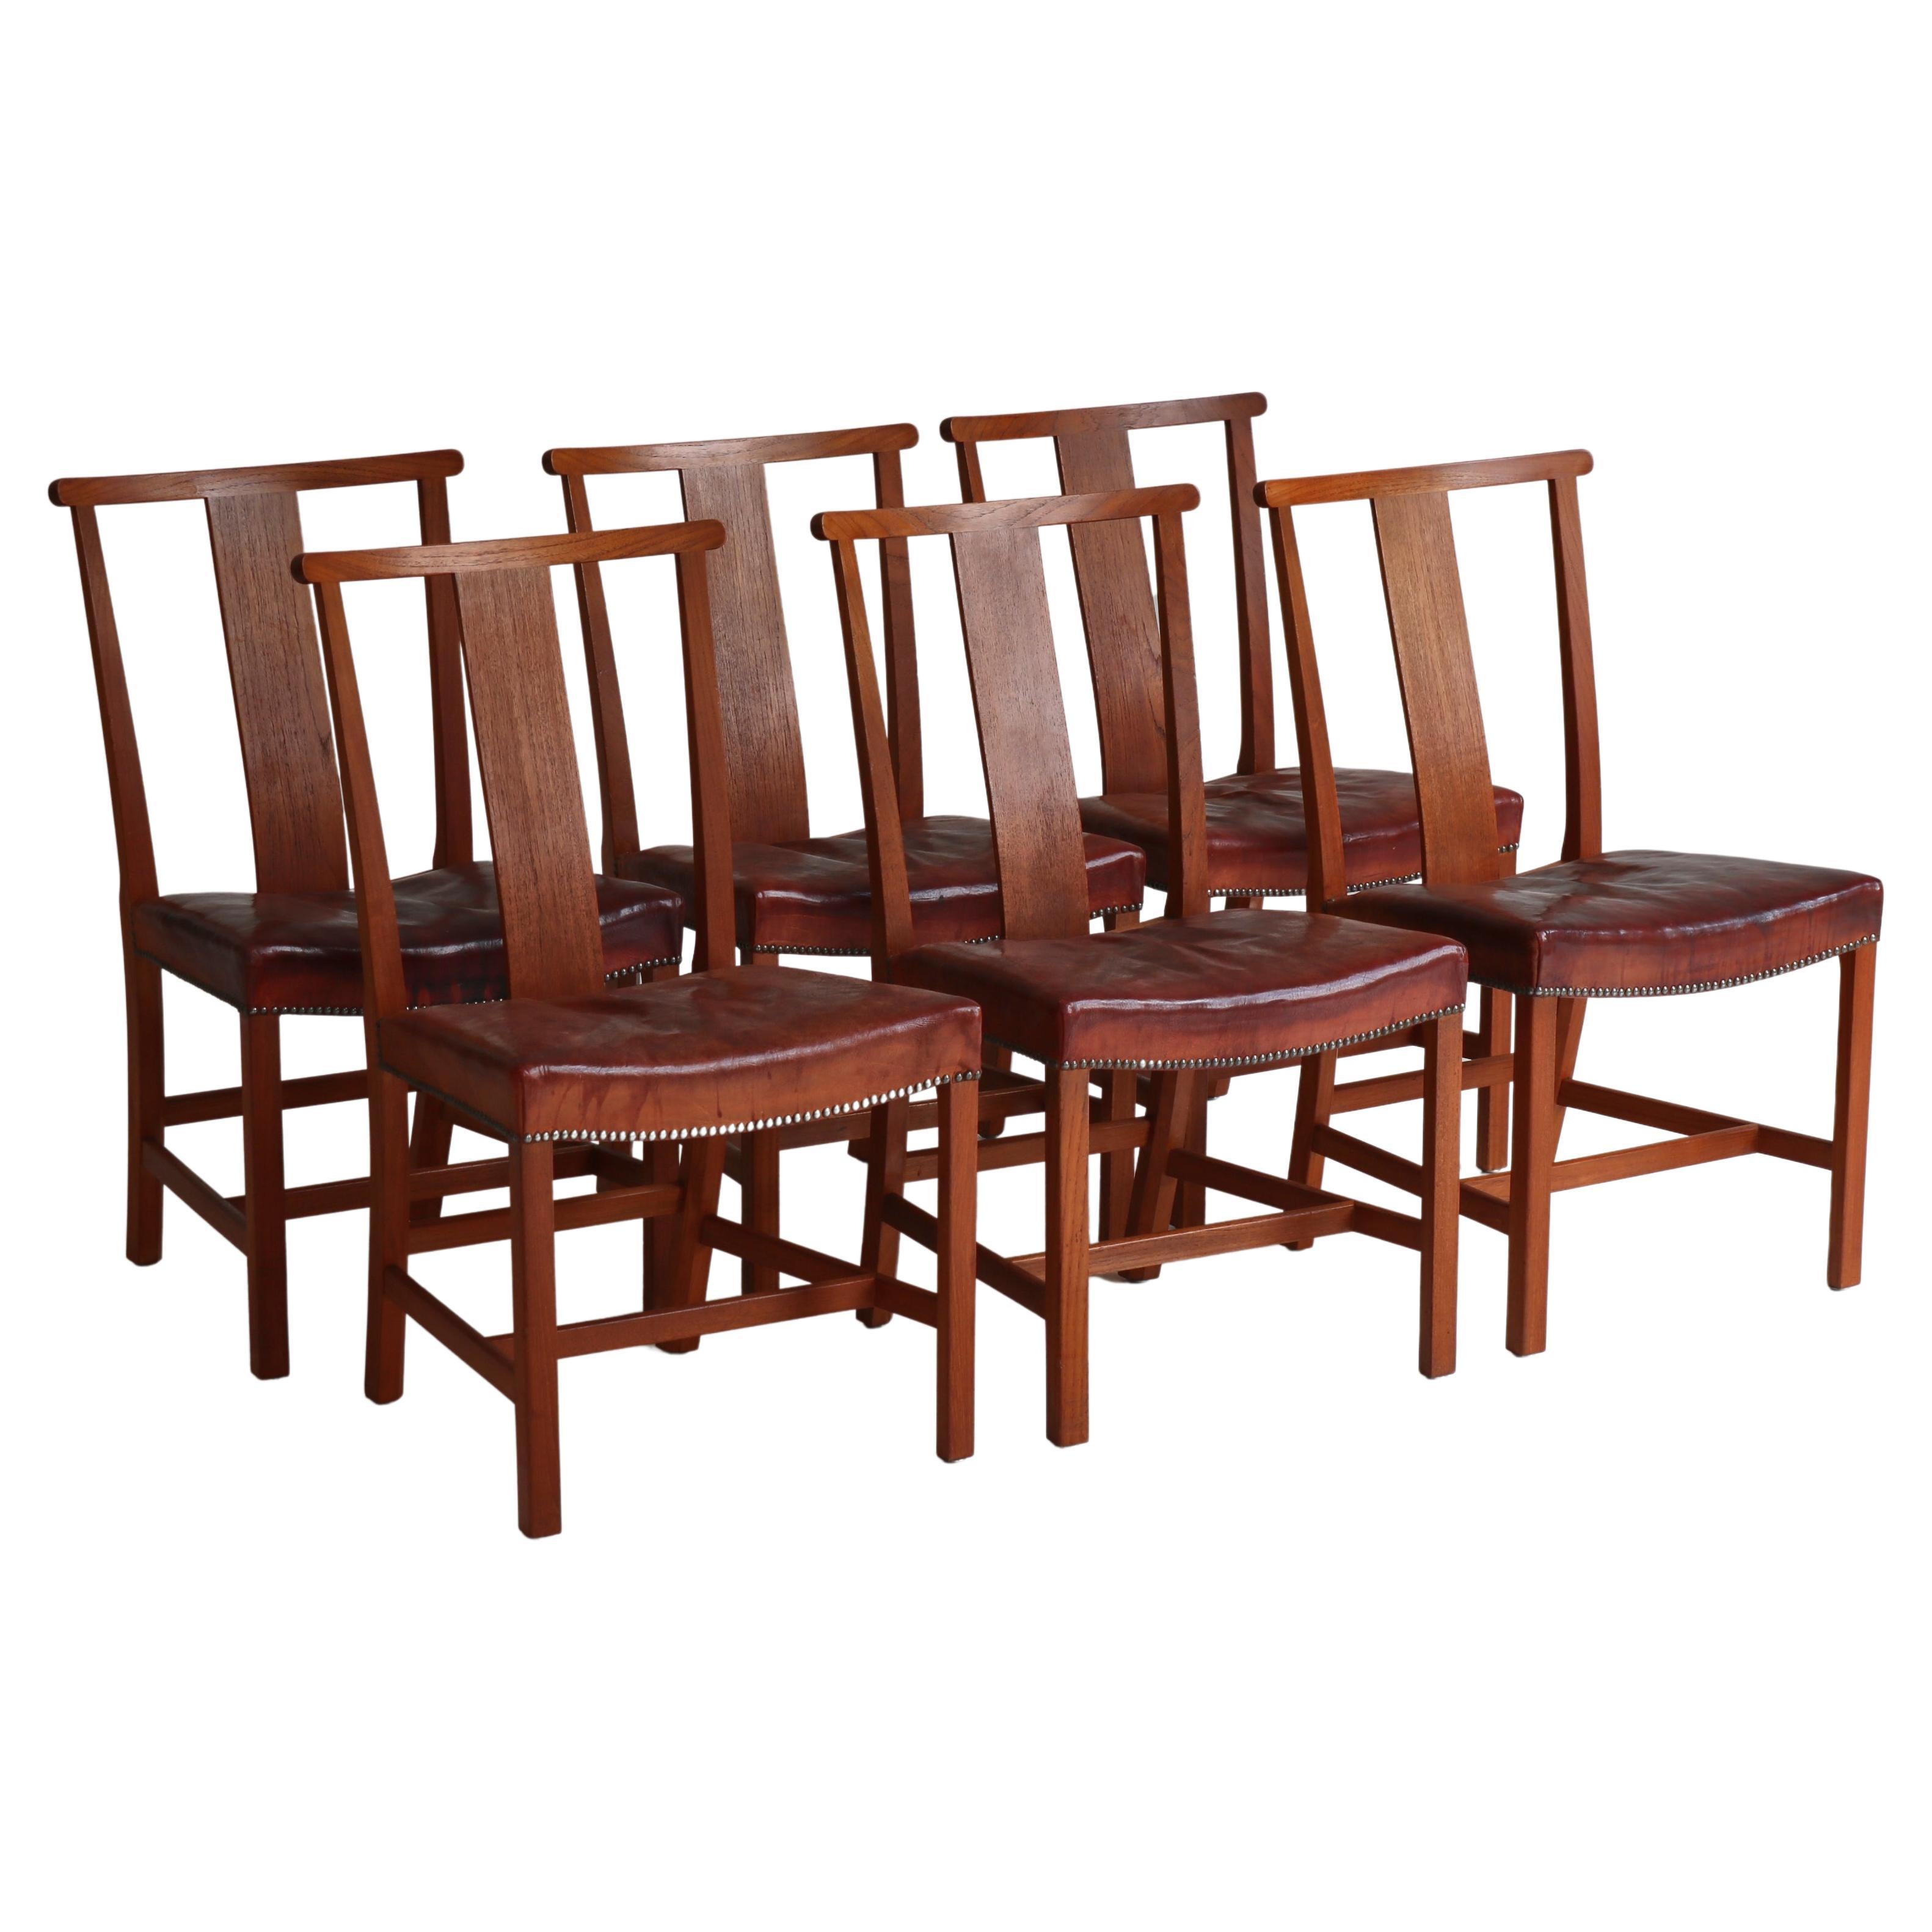 Set of Six Børge Mogensen Dining Chairs in Teak & Niger Leather, 1939, Denmark For Sale